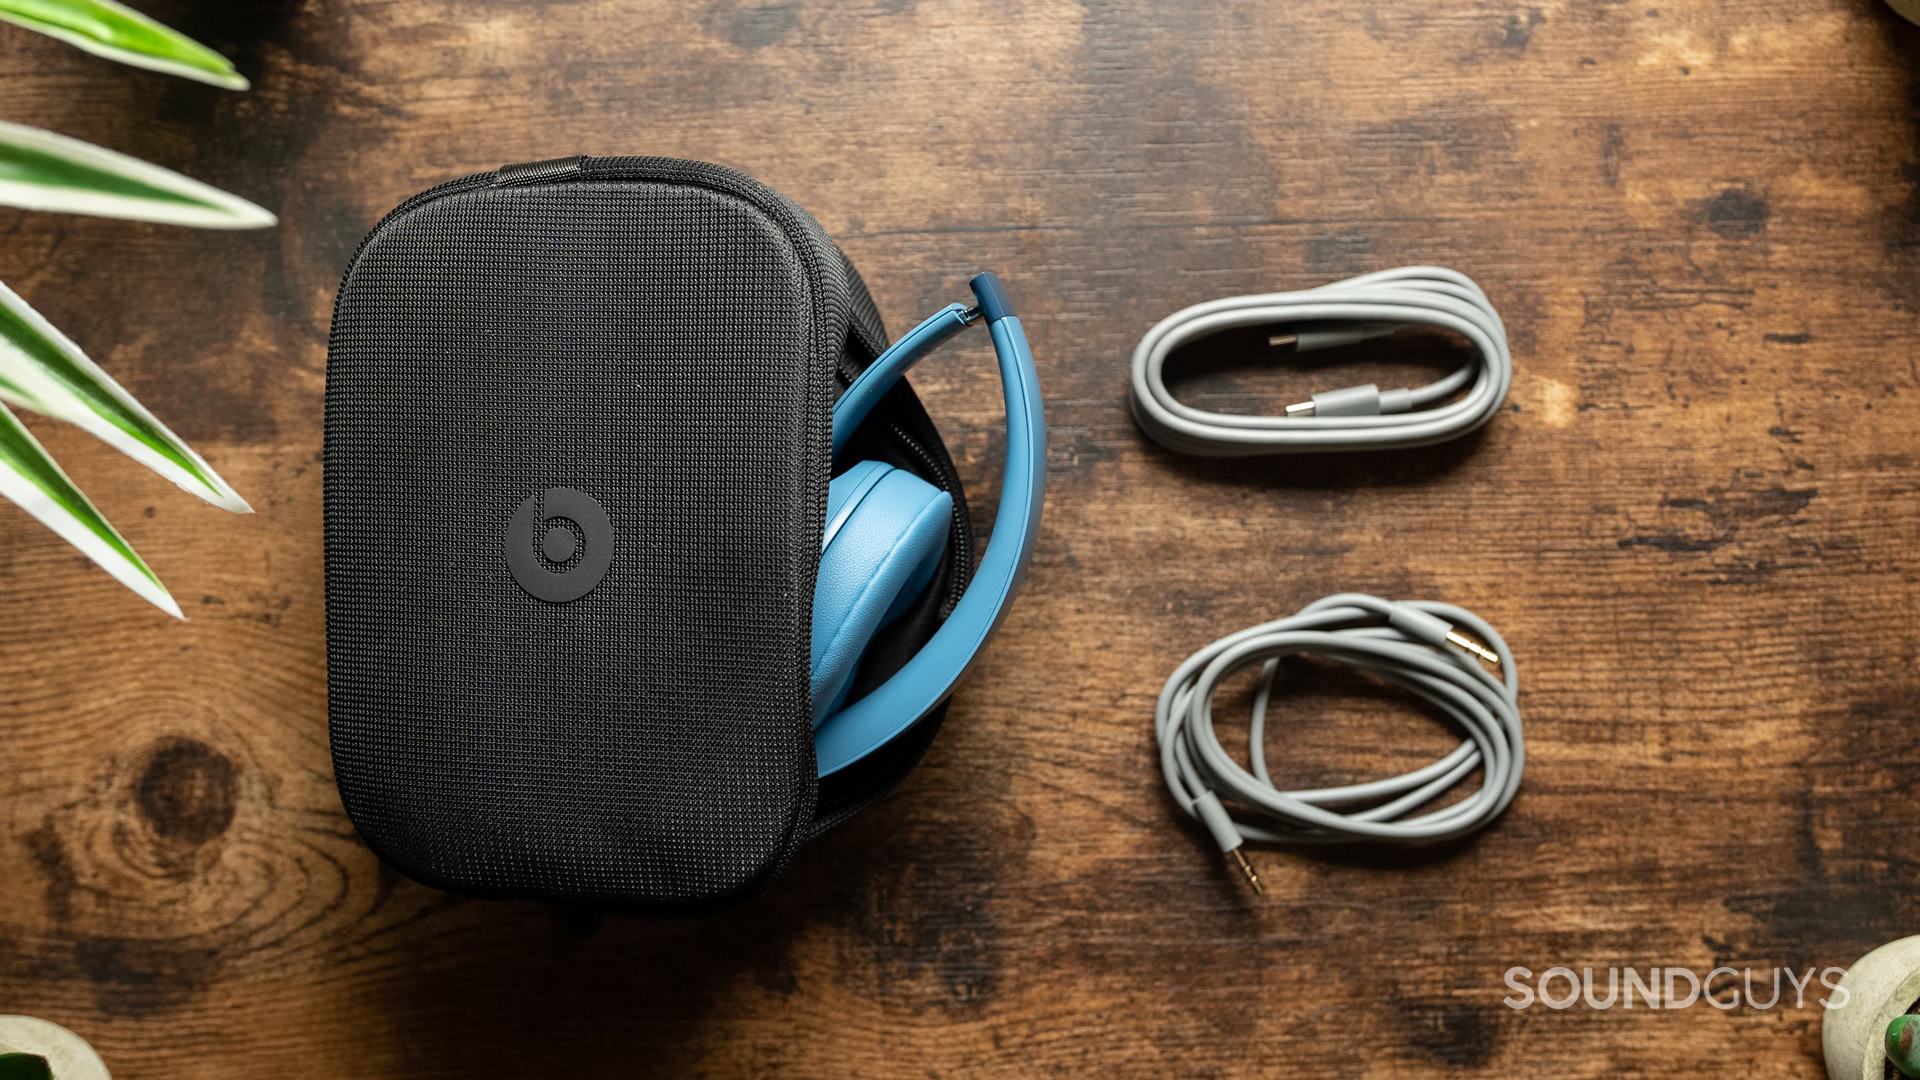 The packaging contents of the Beats Solo 4 include a USB-C cable, 3.5mm TRRS cable, a carrying case, and your headphones.